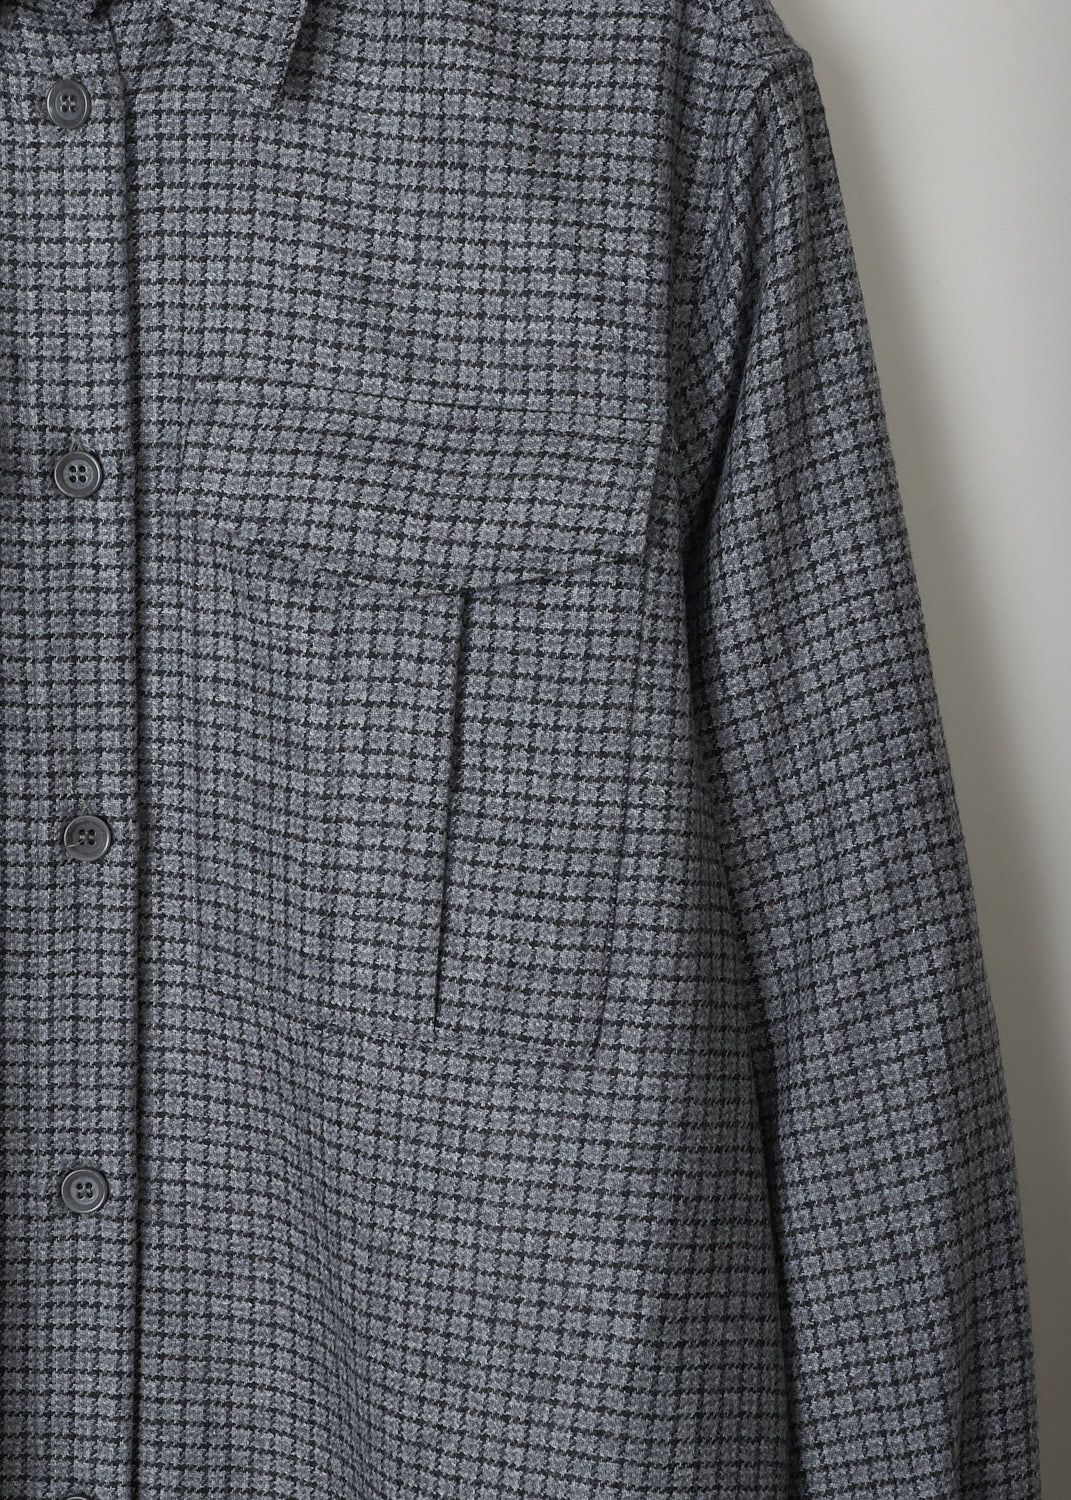 ASPESI, GREY CHECKERED SHIRT DRESS, 2986_L629_42173, Grey, Print, Detail, This grey checkered shirt dress has a classic collar and a button placket in the front. The long sleeves have buttoned cuffs. The dress has two breast pockets and two concealed slanted pockets. The dress has an asymmetrical finish, meaning the back is longer than the front. The dress has a curved hemline. 
